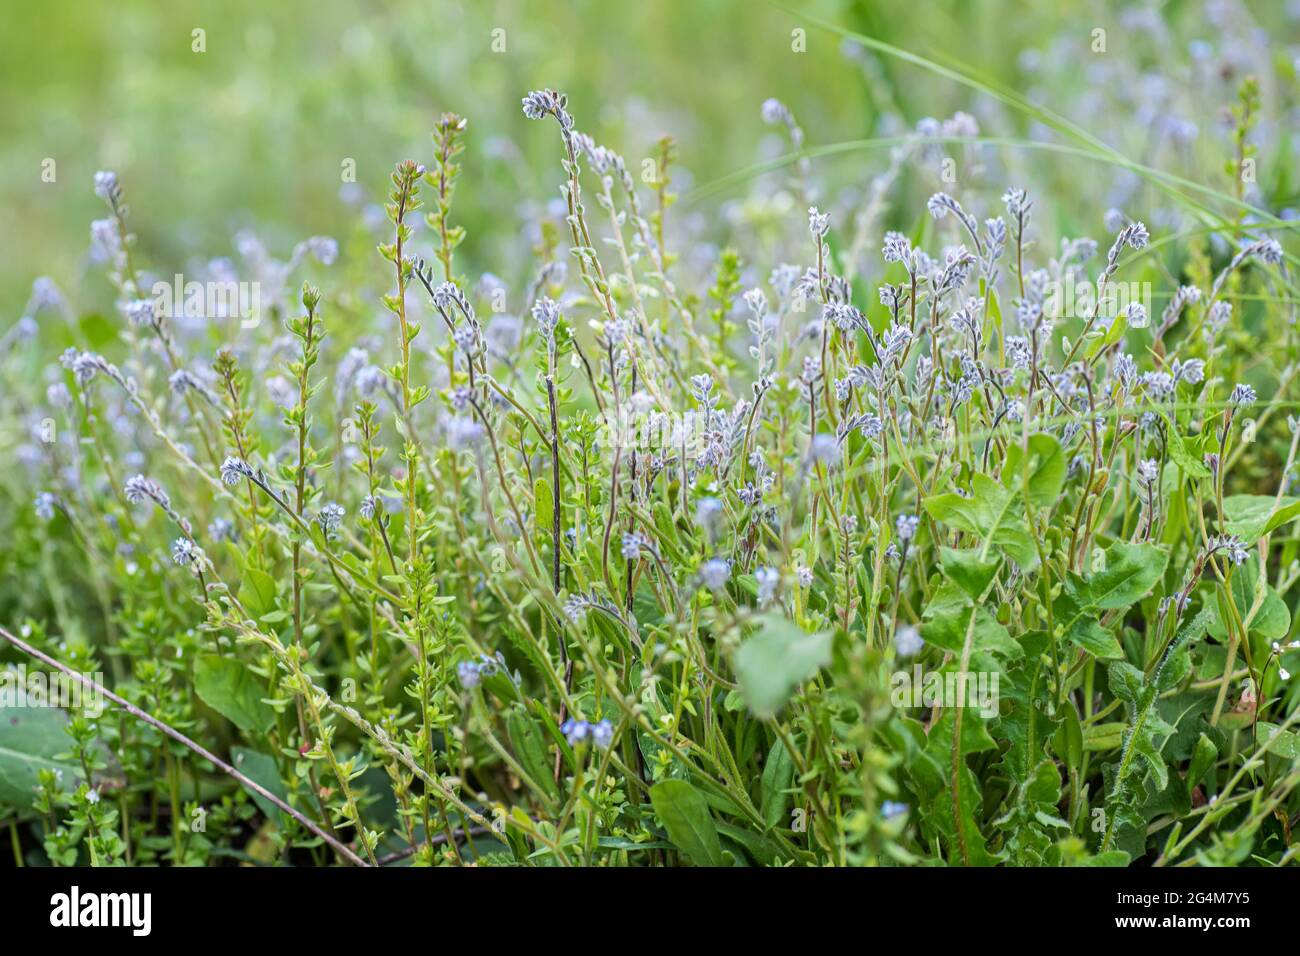 Myosotis stricta, strict forget-me-not and blue scorpion grass blue flowers of ingreen field with flowers of same species Stock Photo